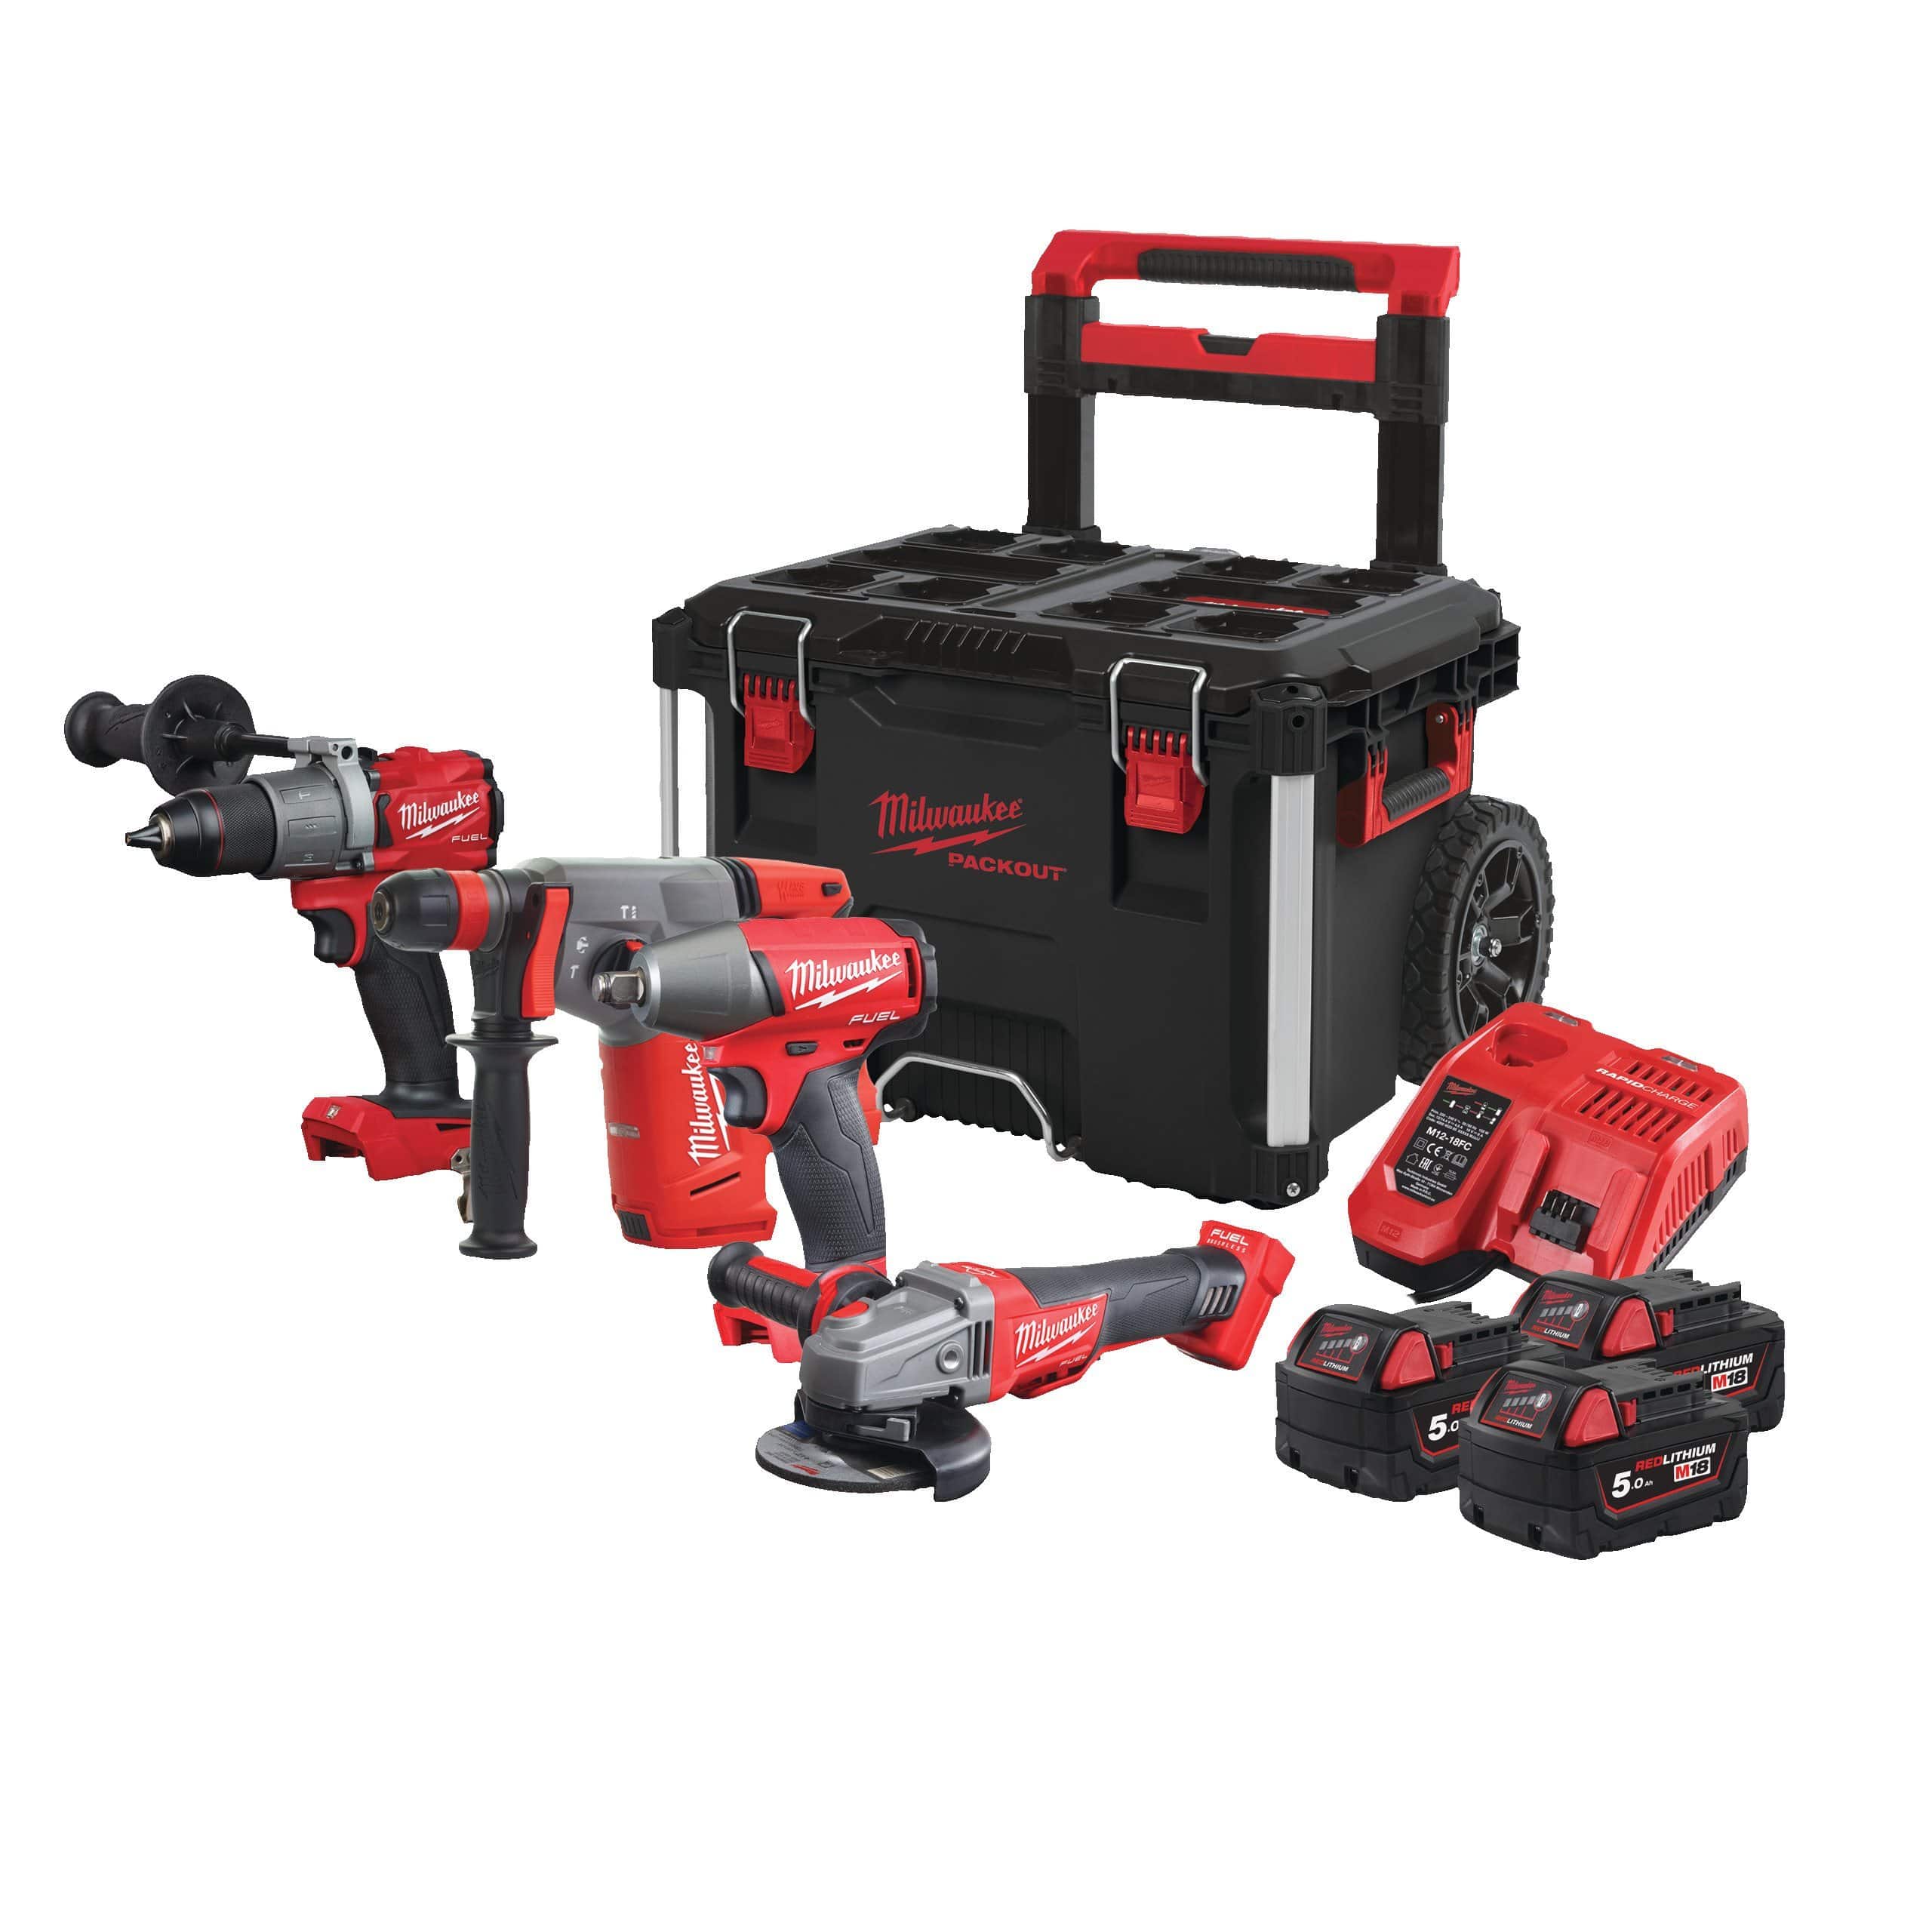 Milwaukee M18 FUEL™ Powerpack Combo Kit - M18 FPP4A-503P | Supply Master | Accra, Ghan Tools Building Steel Engineering Hardware tool